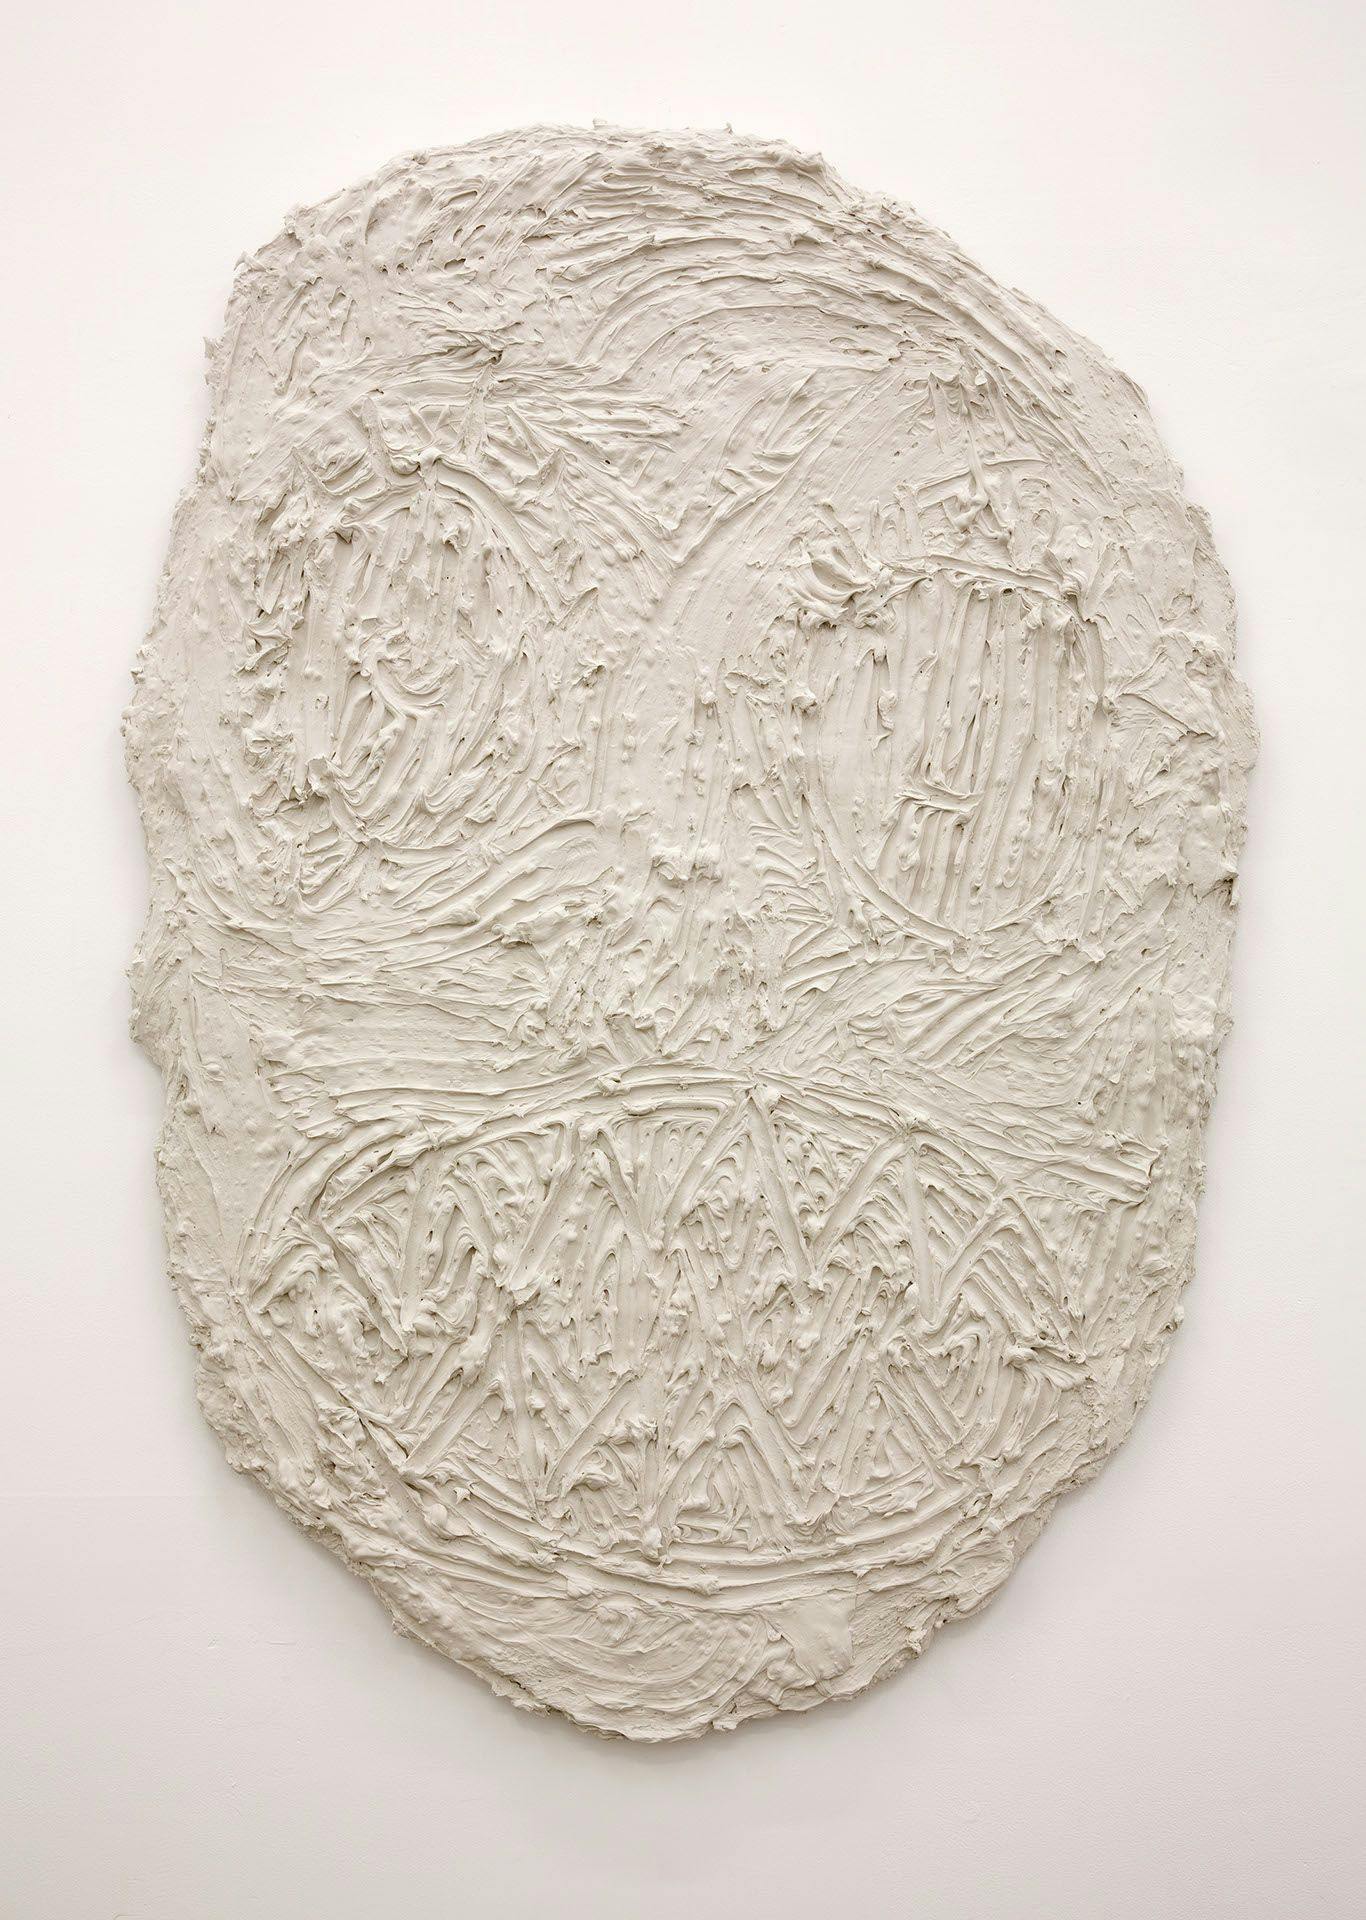 Untitled 1, 2015

plaster, wire, wood 

73 x 50 inches